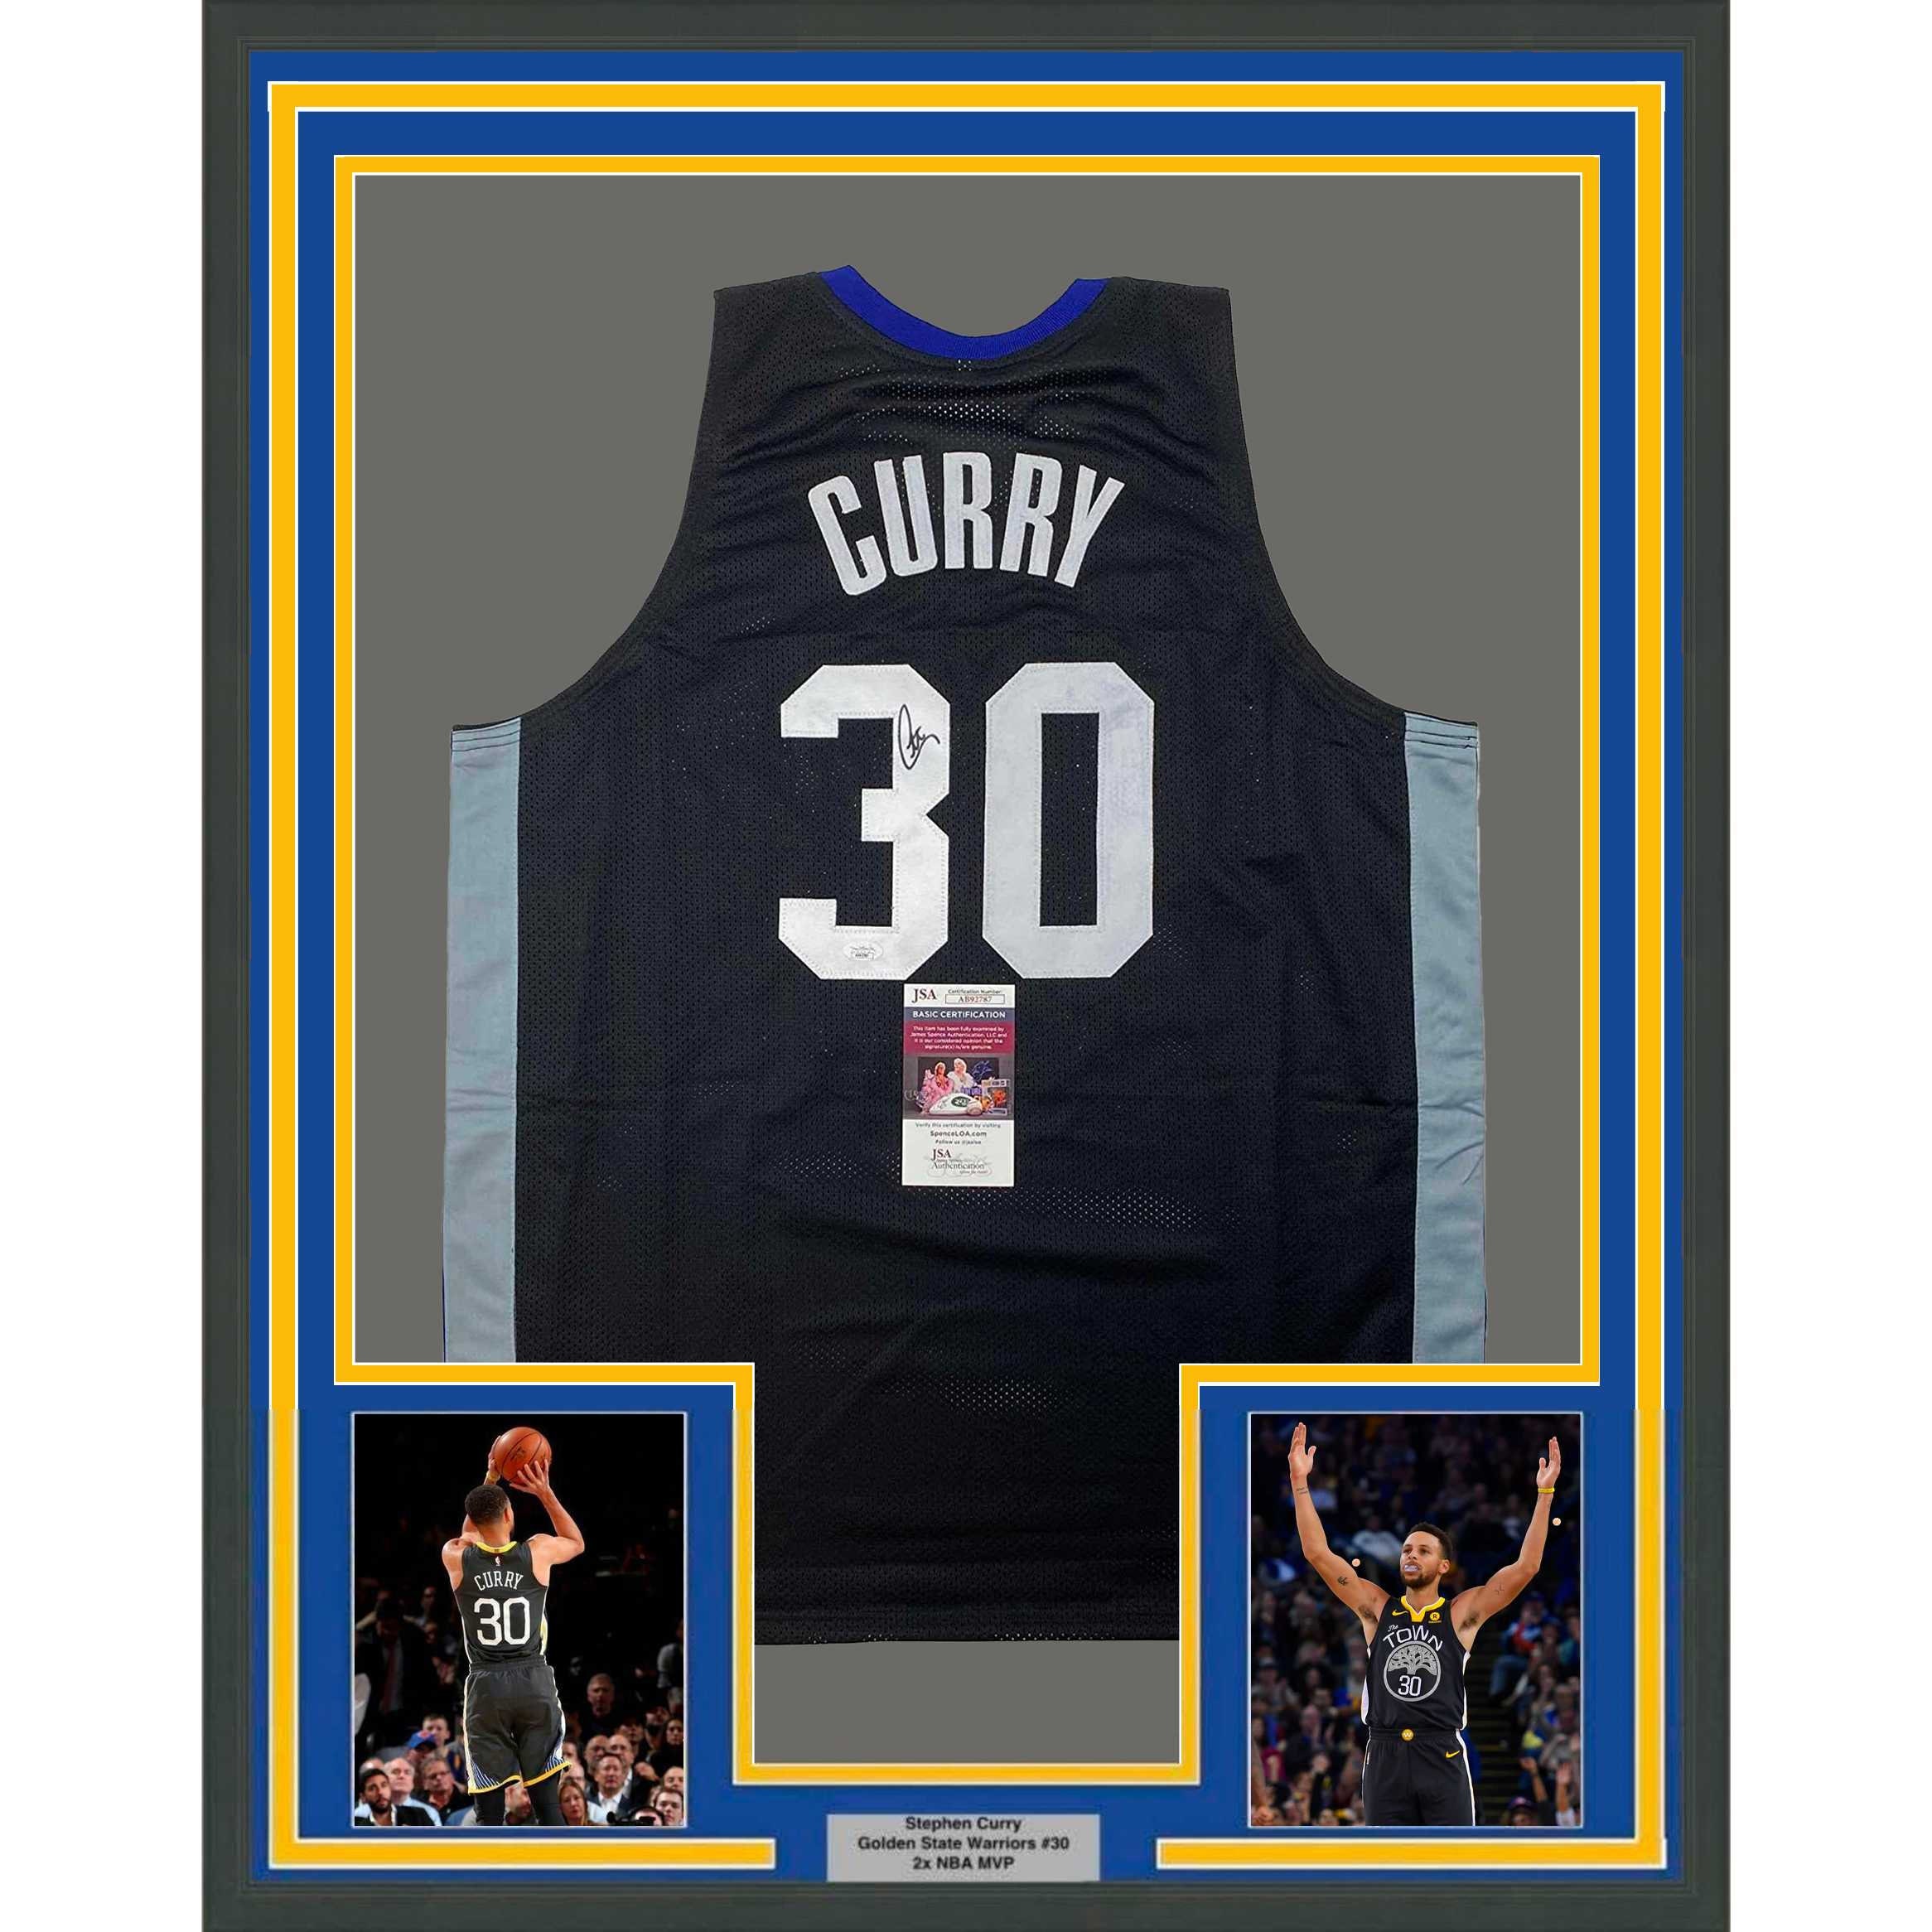 Stephen Steph Curry Signed Autographed Golden State Warriors Custom Jersey  PSA